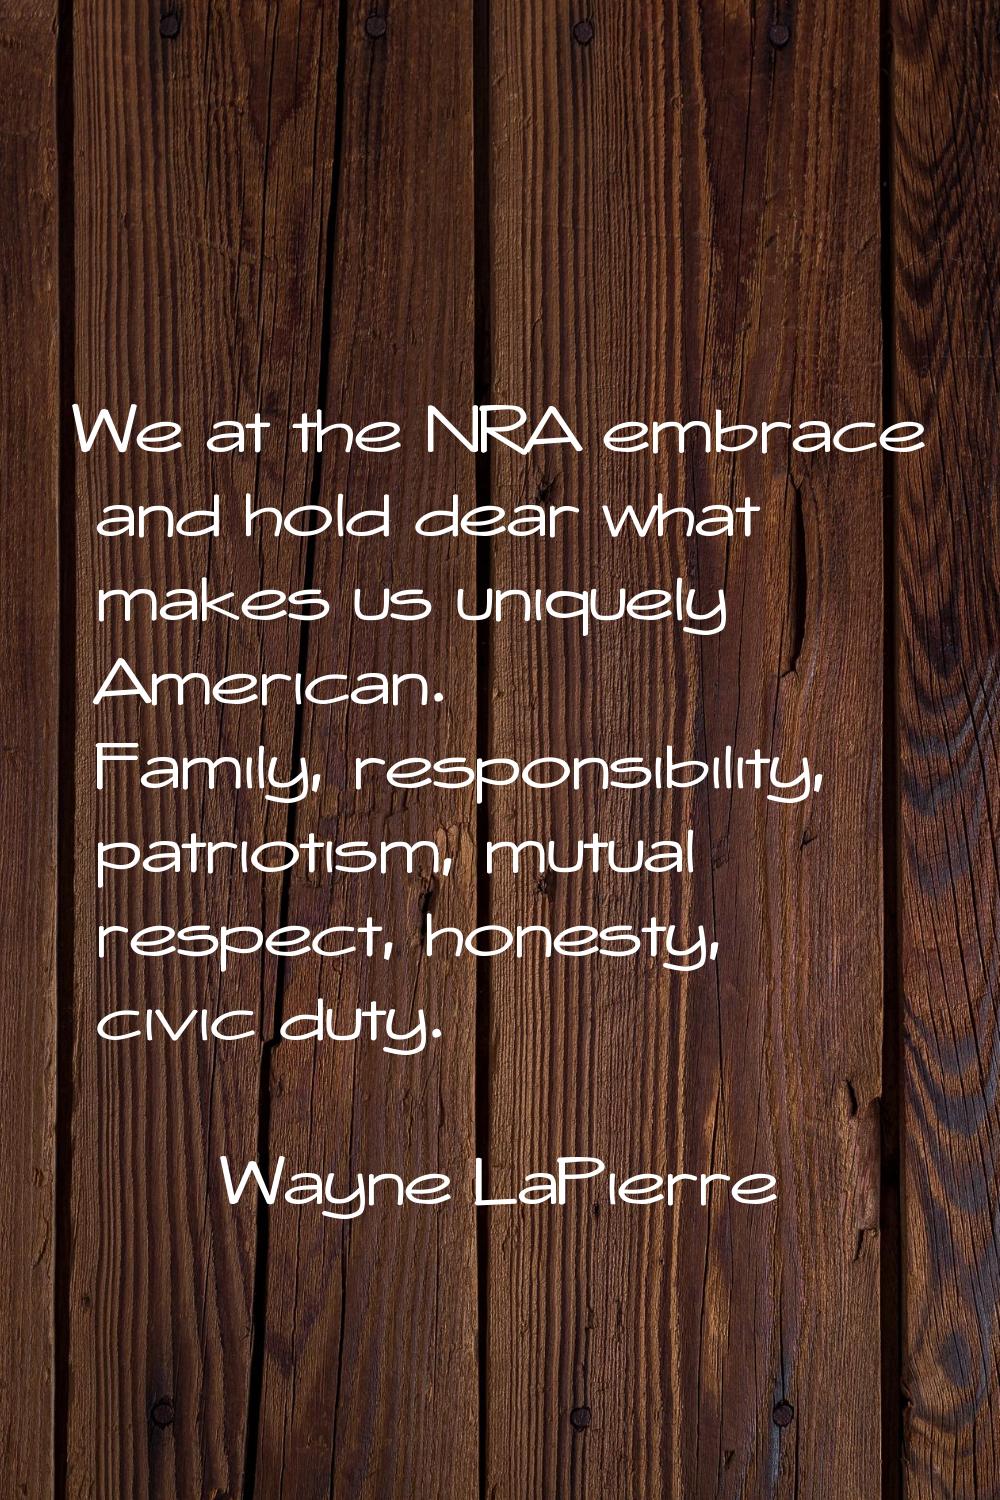 We at the NRA embrace and hold dear what makes us uniquely American. Family, responsibility, patrio